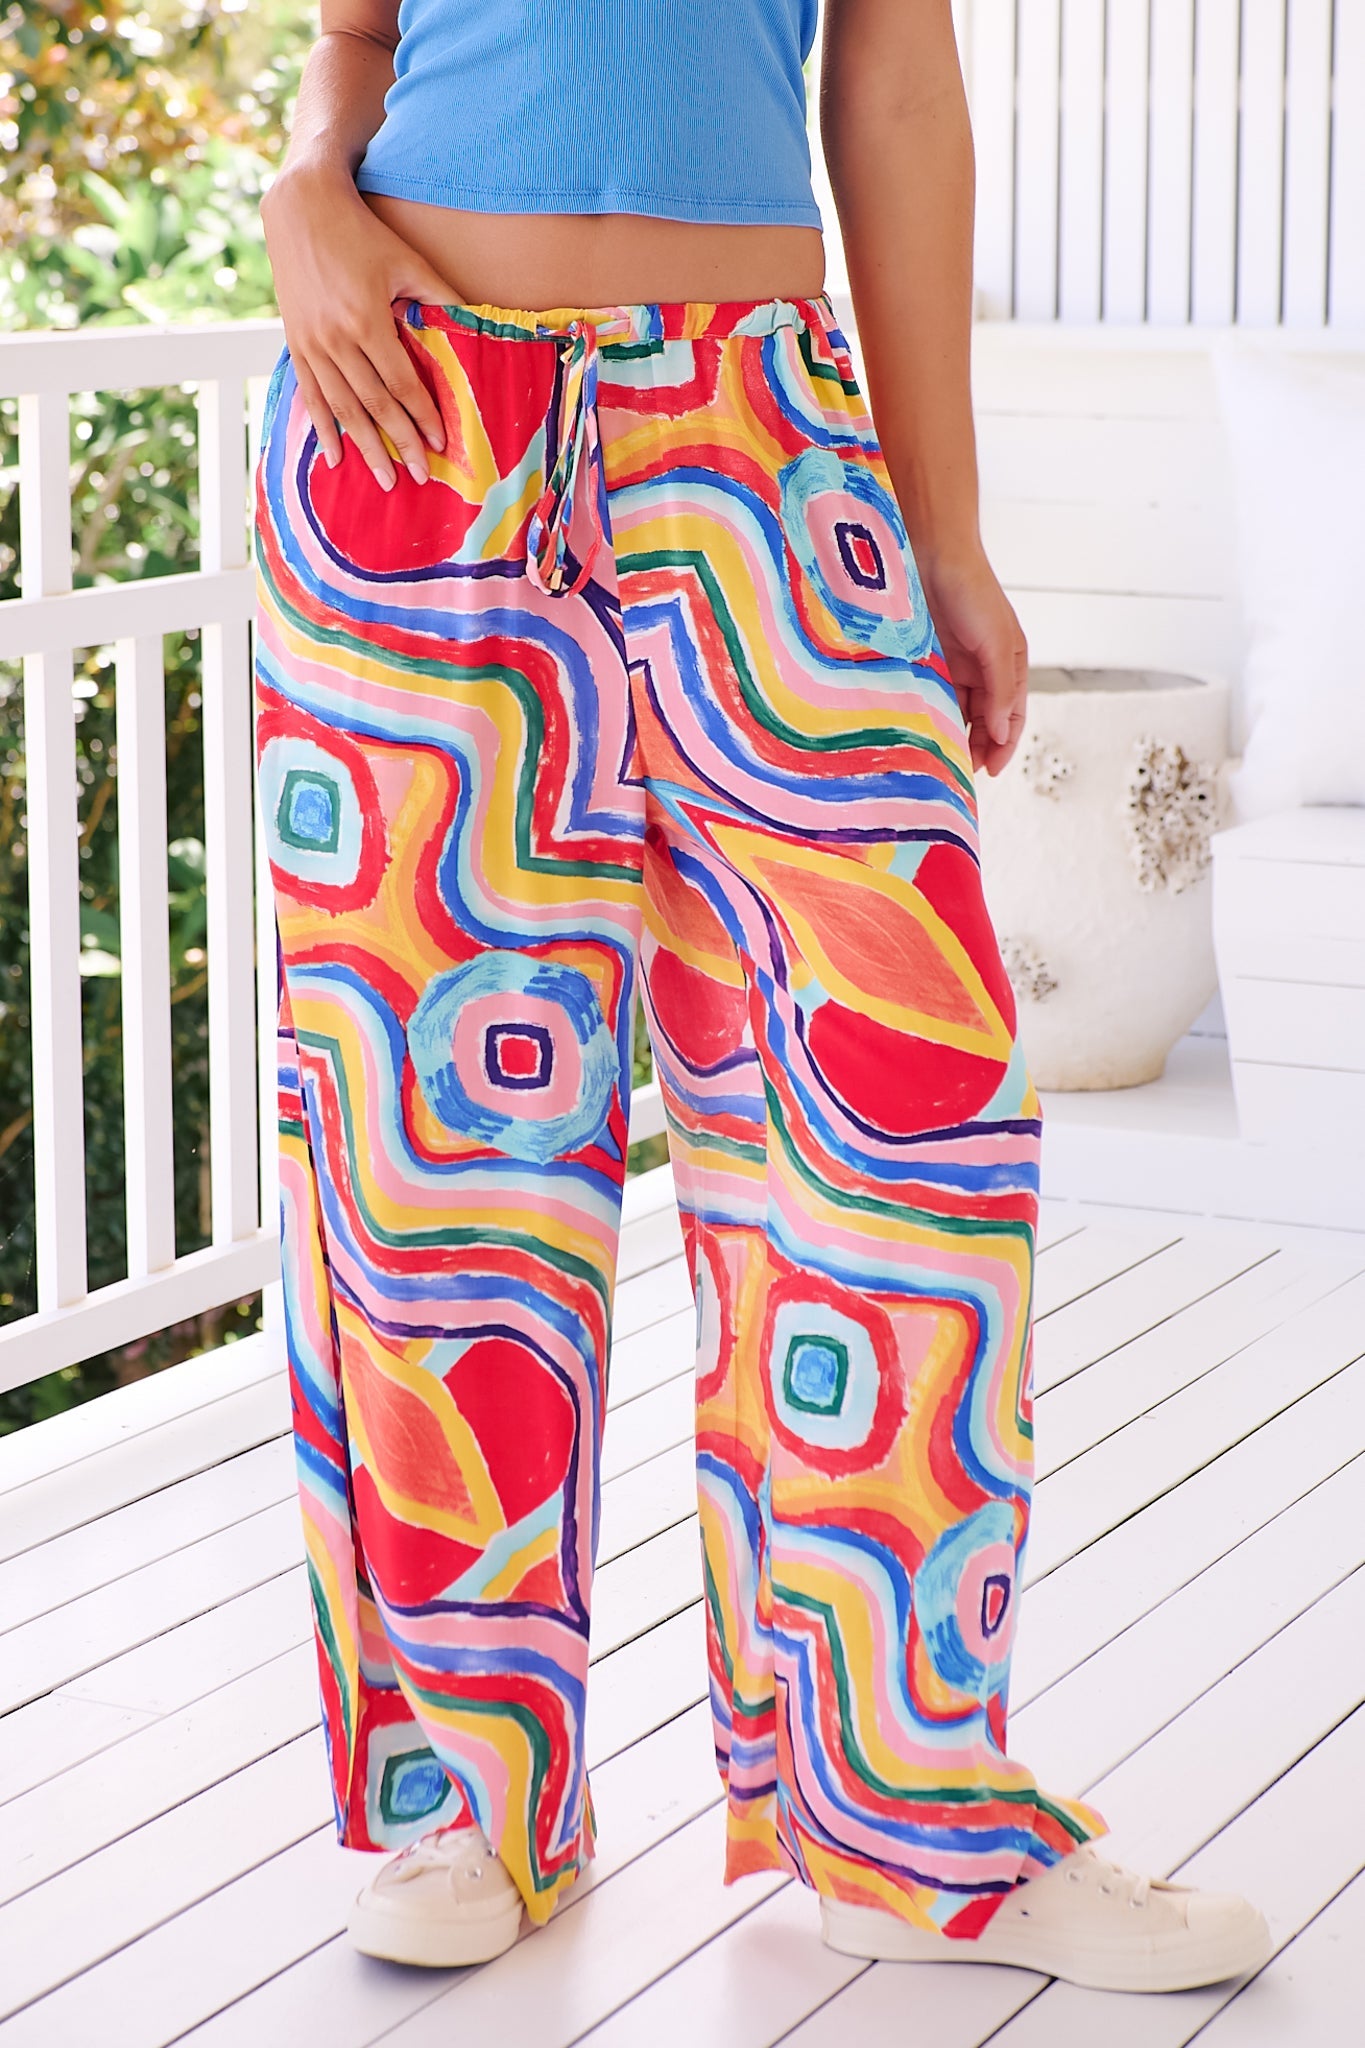 JAASE - Cici Pants: Mid Rise Relaxed Wide Leg Pant in Bergamo Print